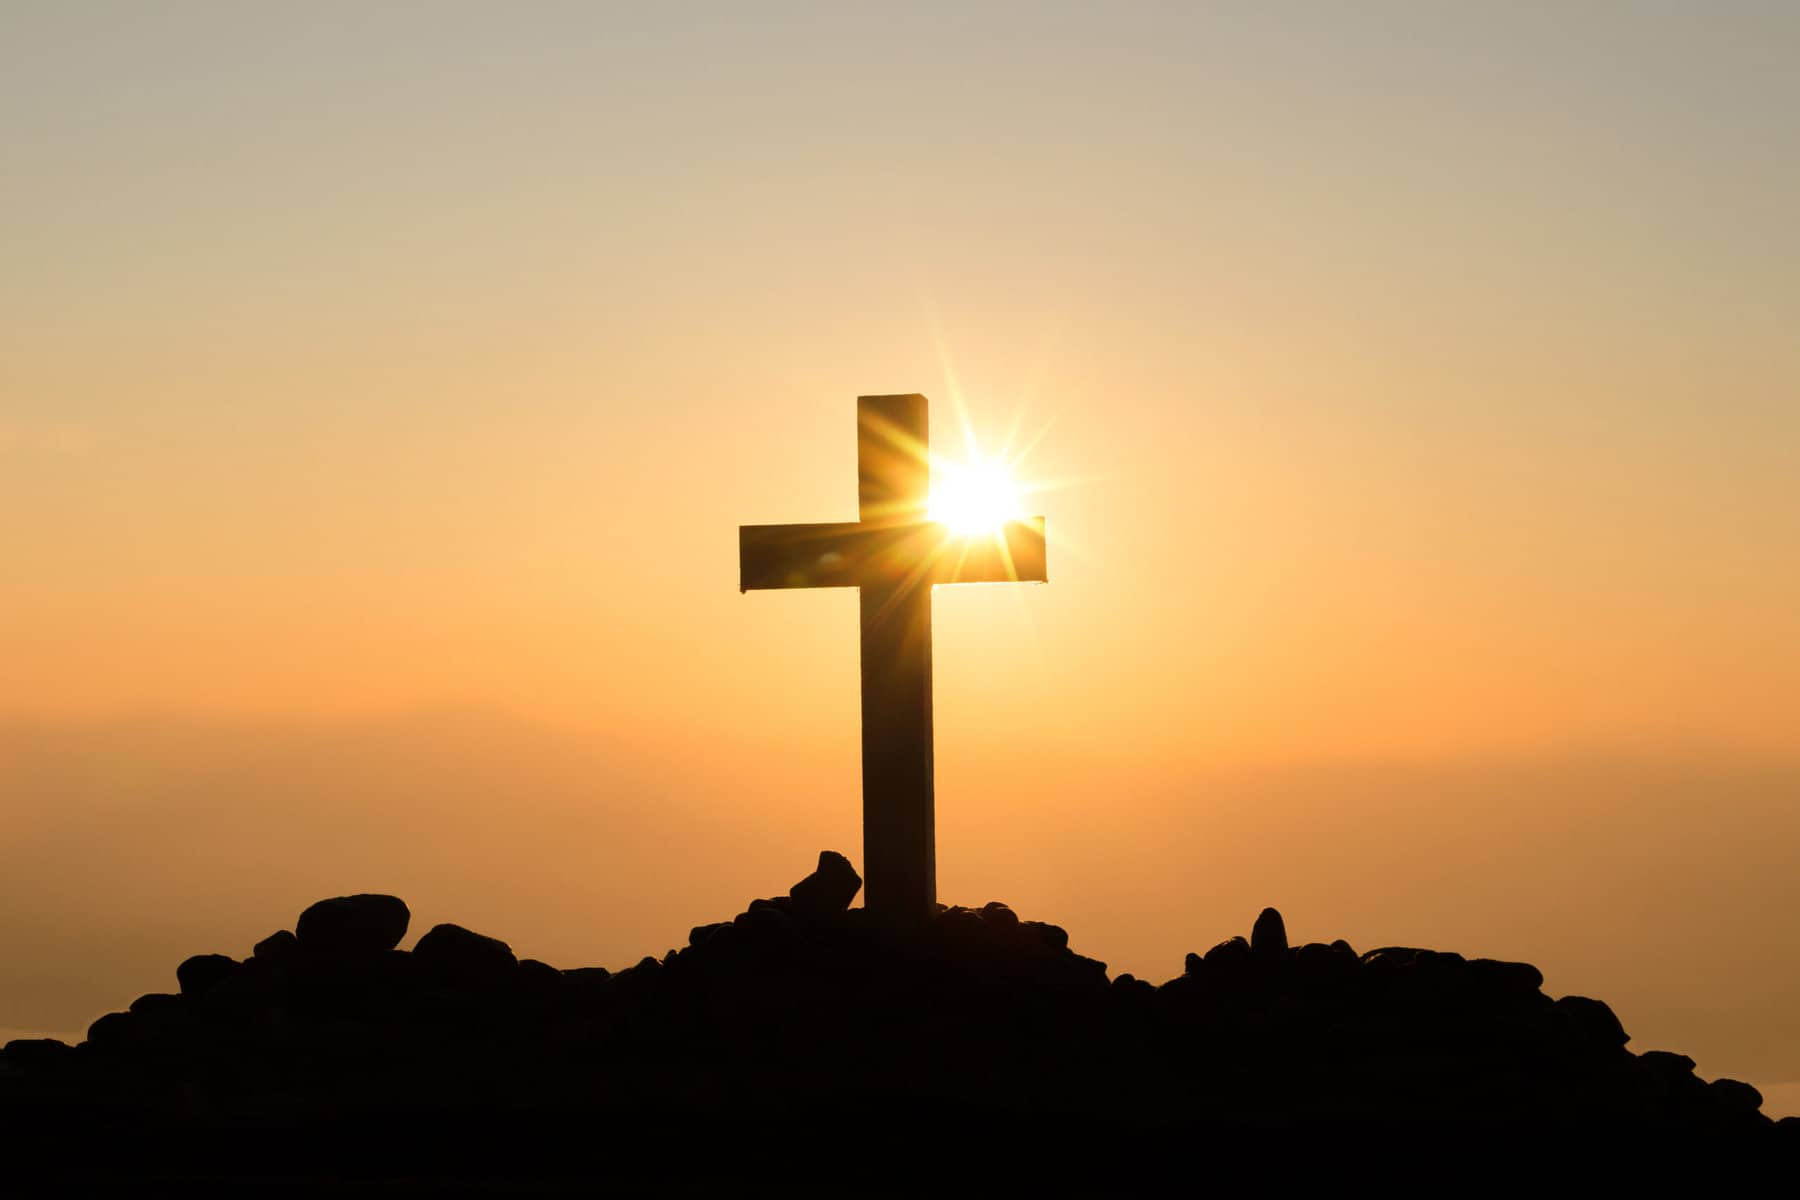 A thick beam cross is shown on a hill with the sun setting behind it.